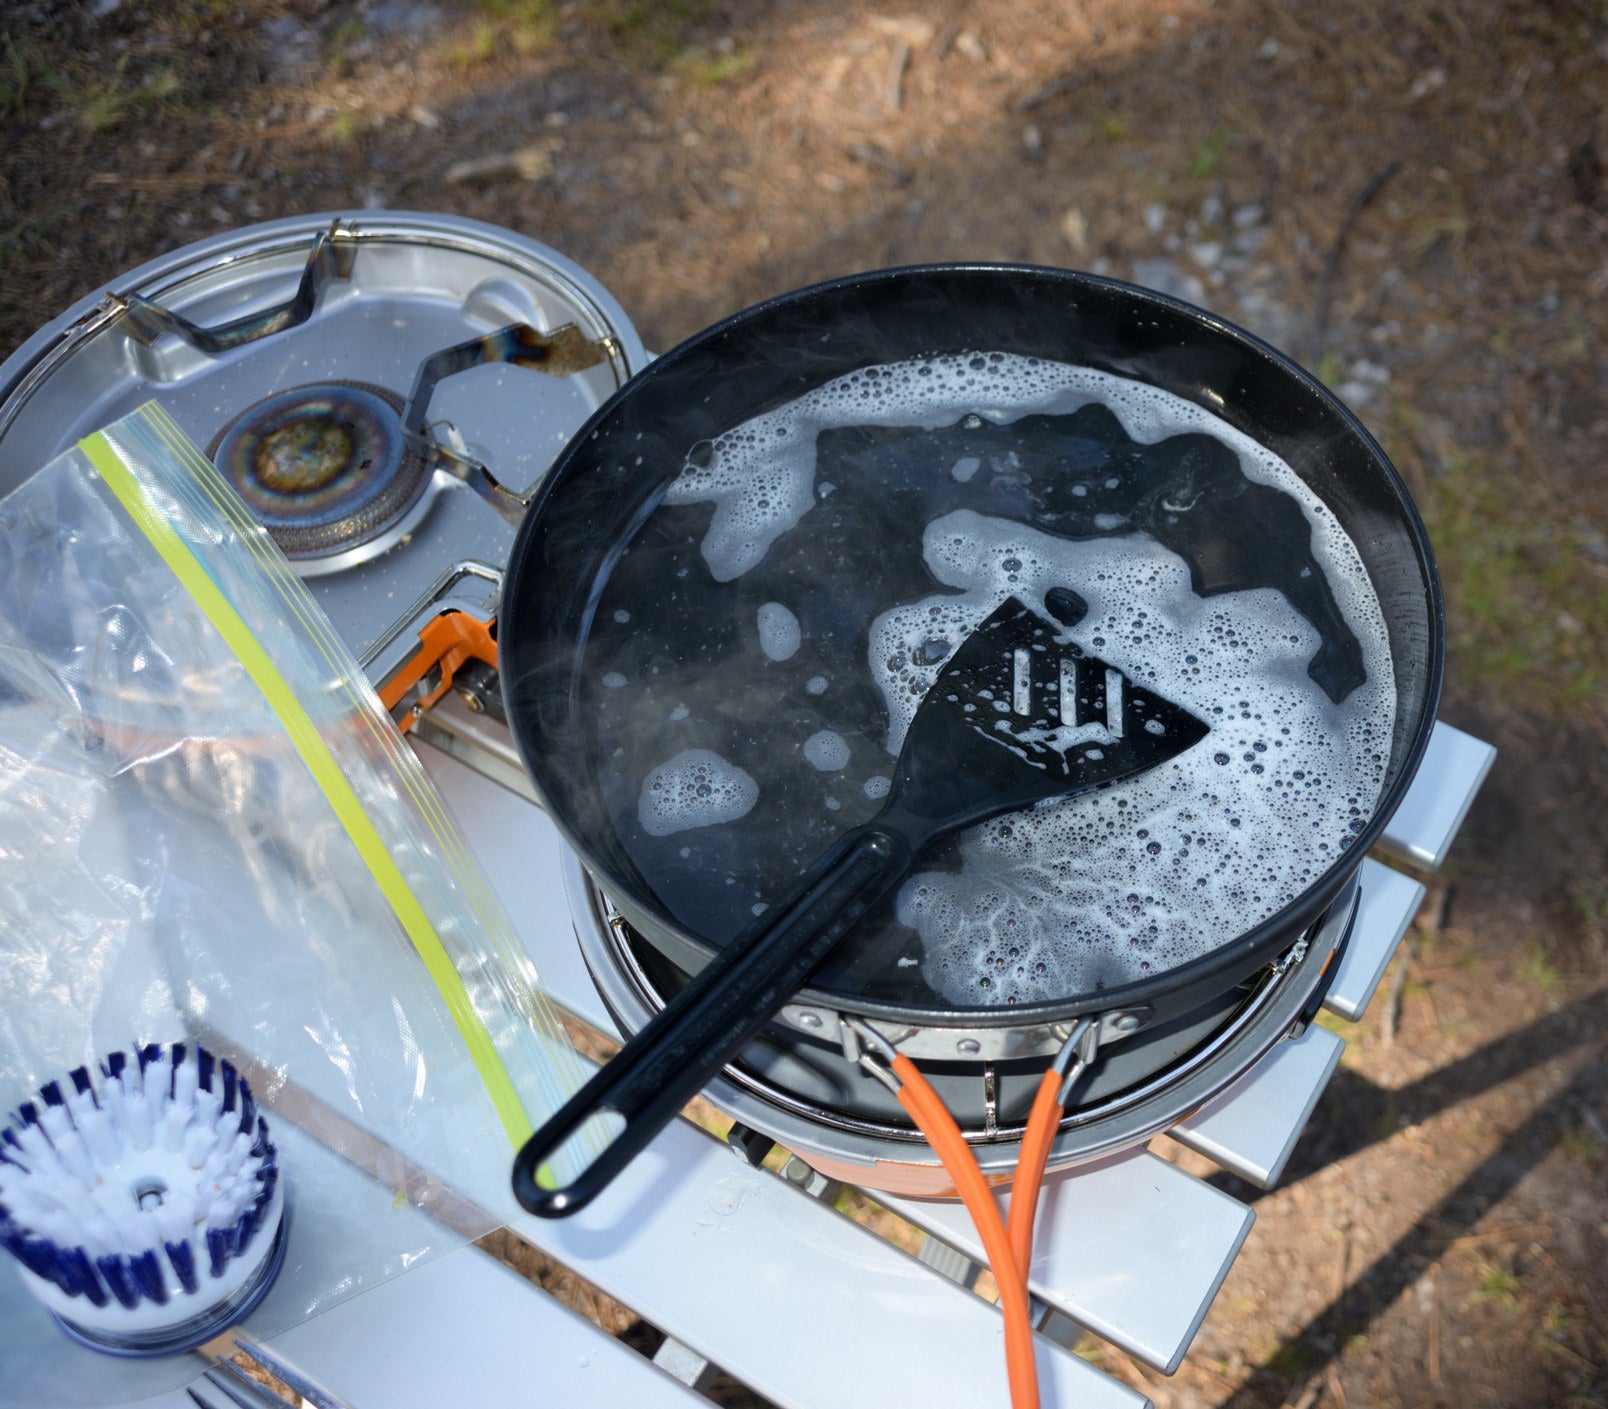 Cleaning a cooking pan and spatula on the camp stove